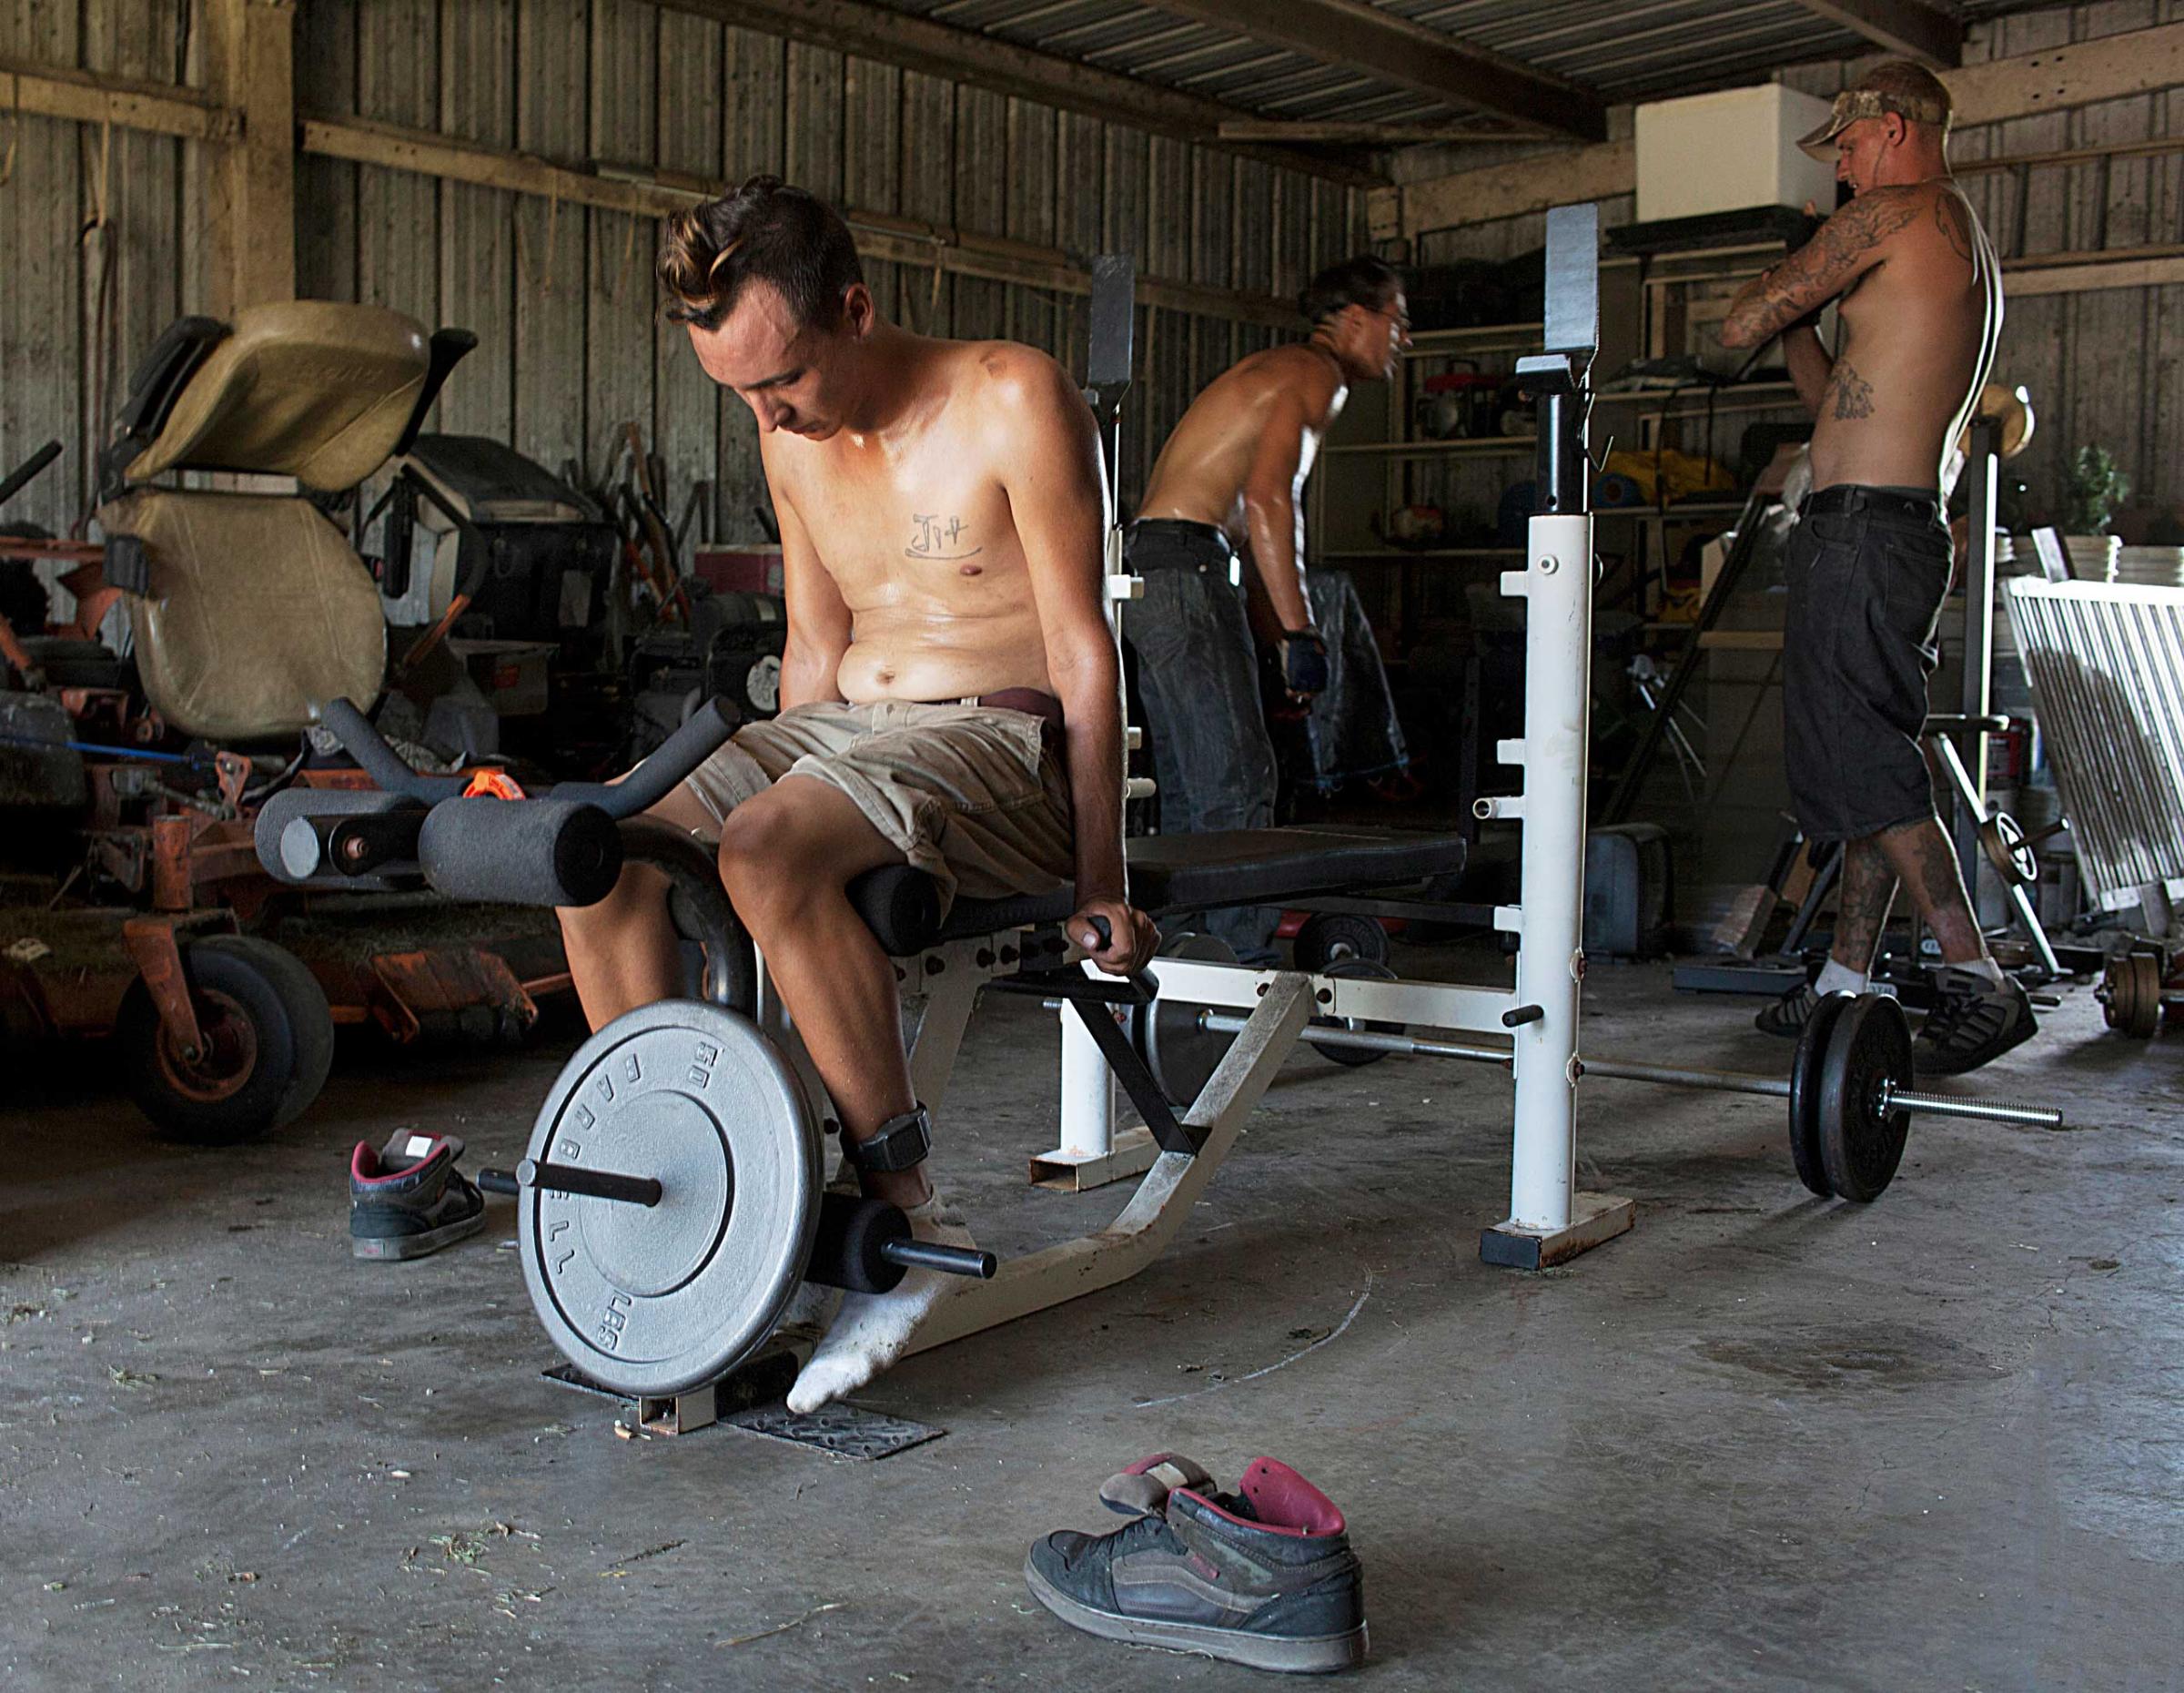 Matt exercising in the back shed in the village with David and Lee."Growing up with my mom was enough, I'm ready to move on. All I did was go to school and take care of the house. It was like living in boot camp. She was the one that called the cops on me in order to protect her job or so she said."